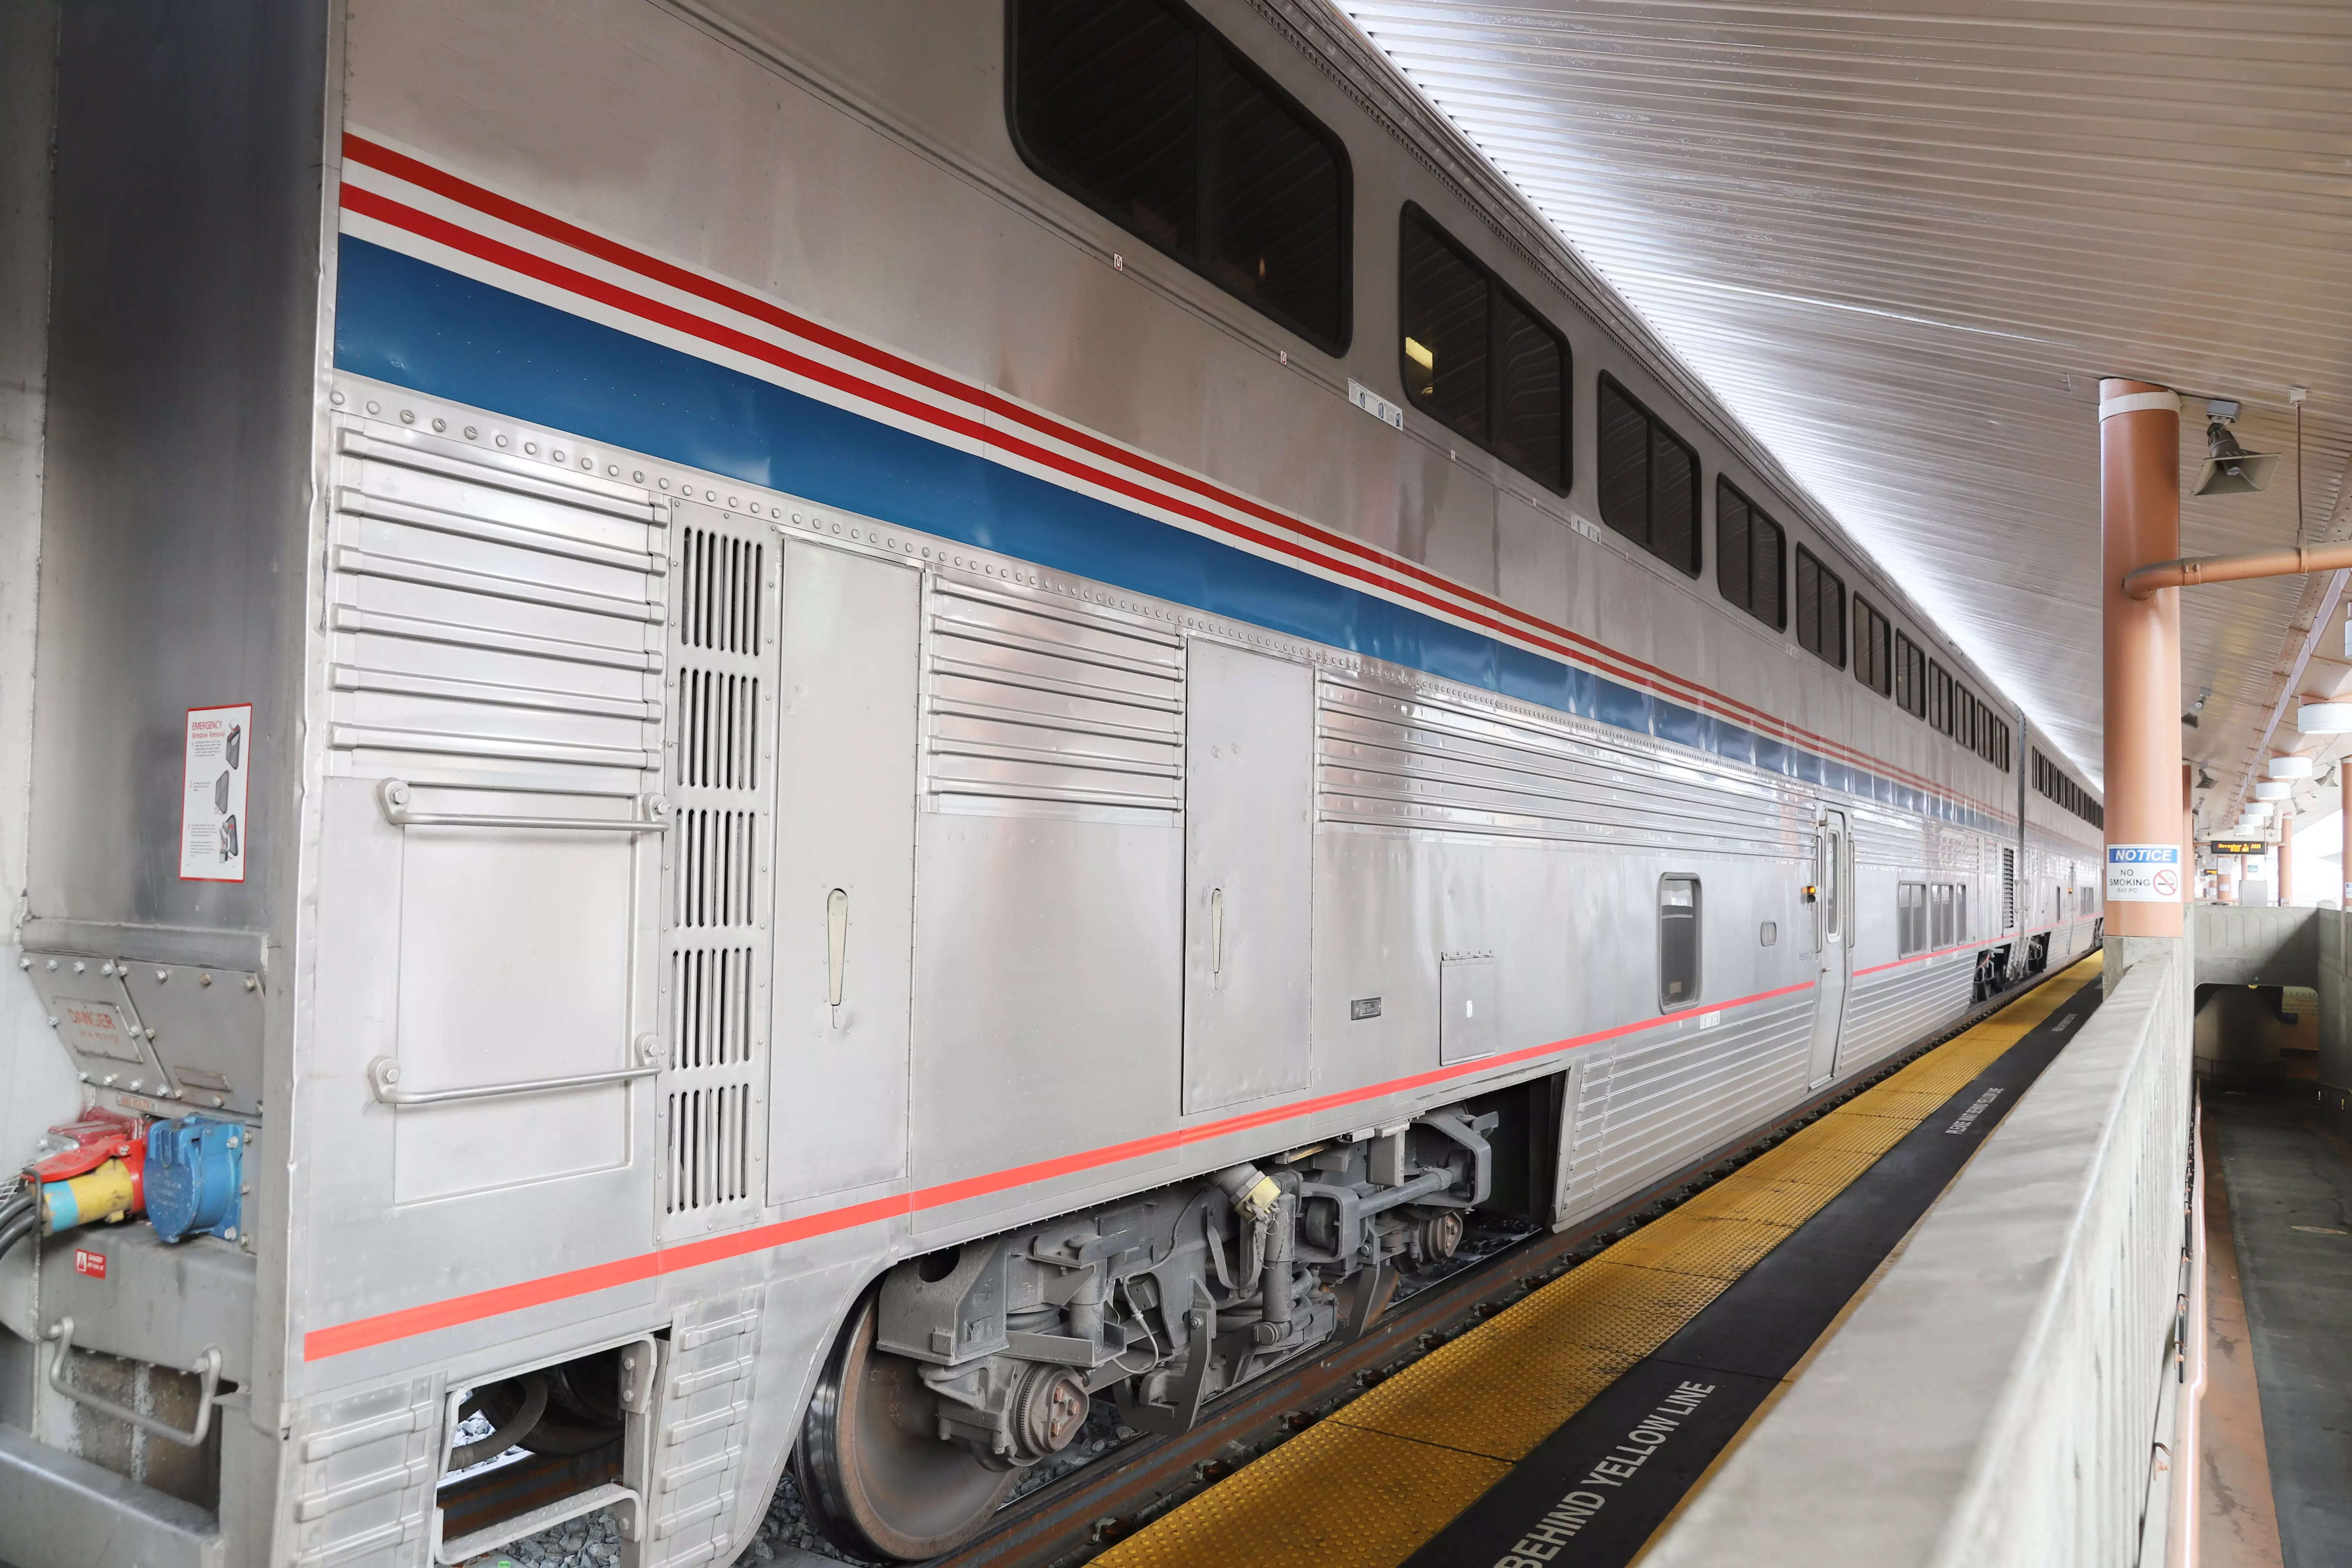 The exterior of an Amtrak train at a station.